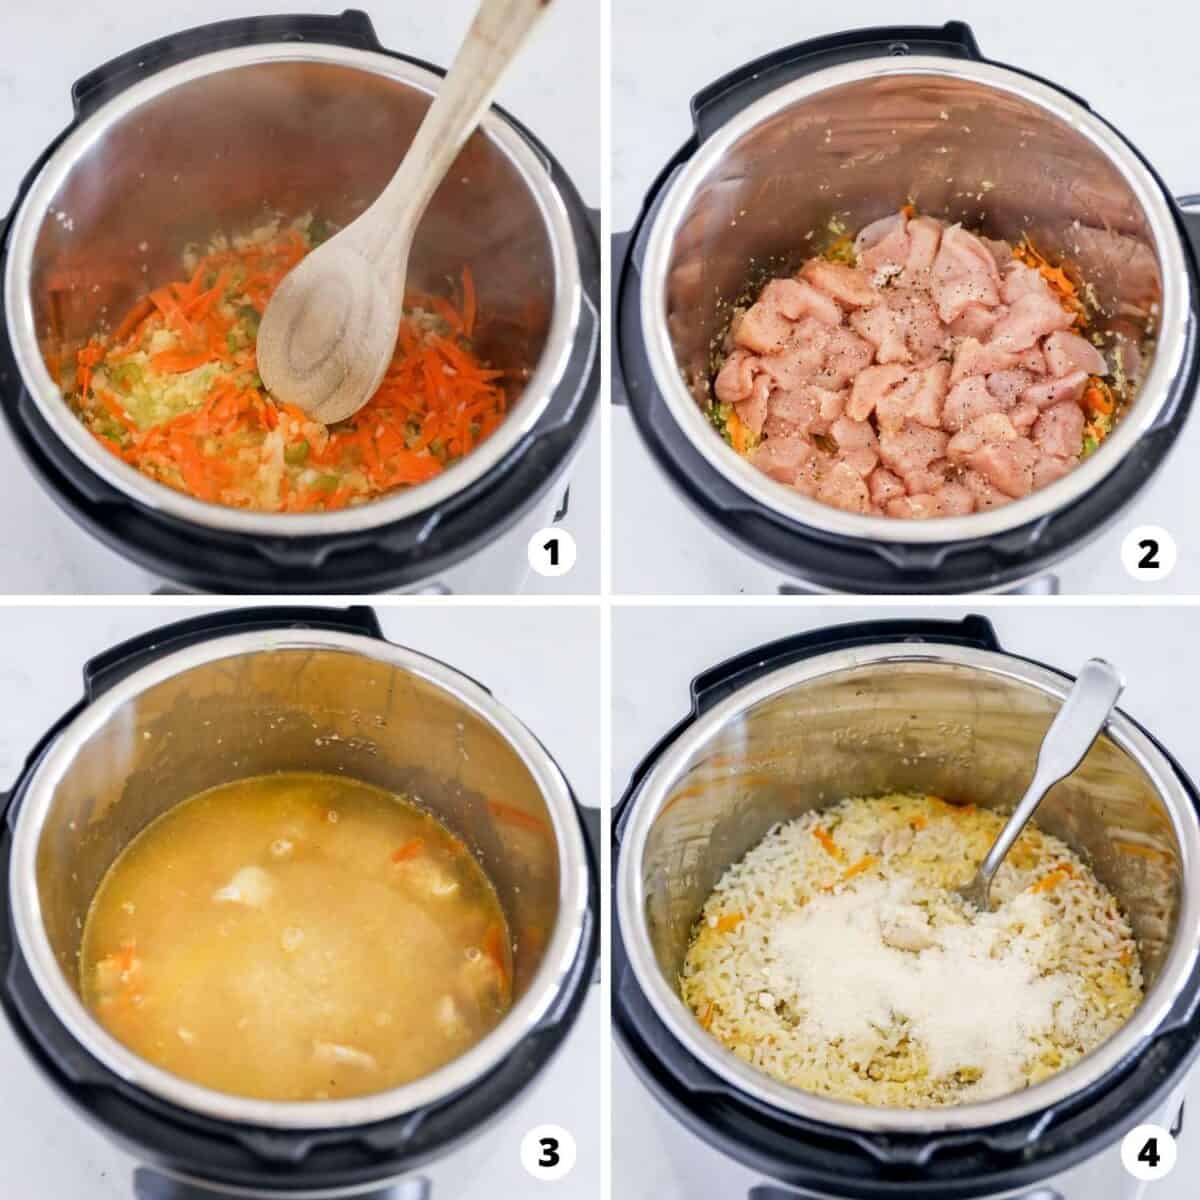 The process of making Instant Pot Chicken and Rice in a 4 step collage.